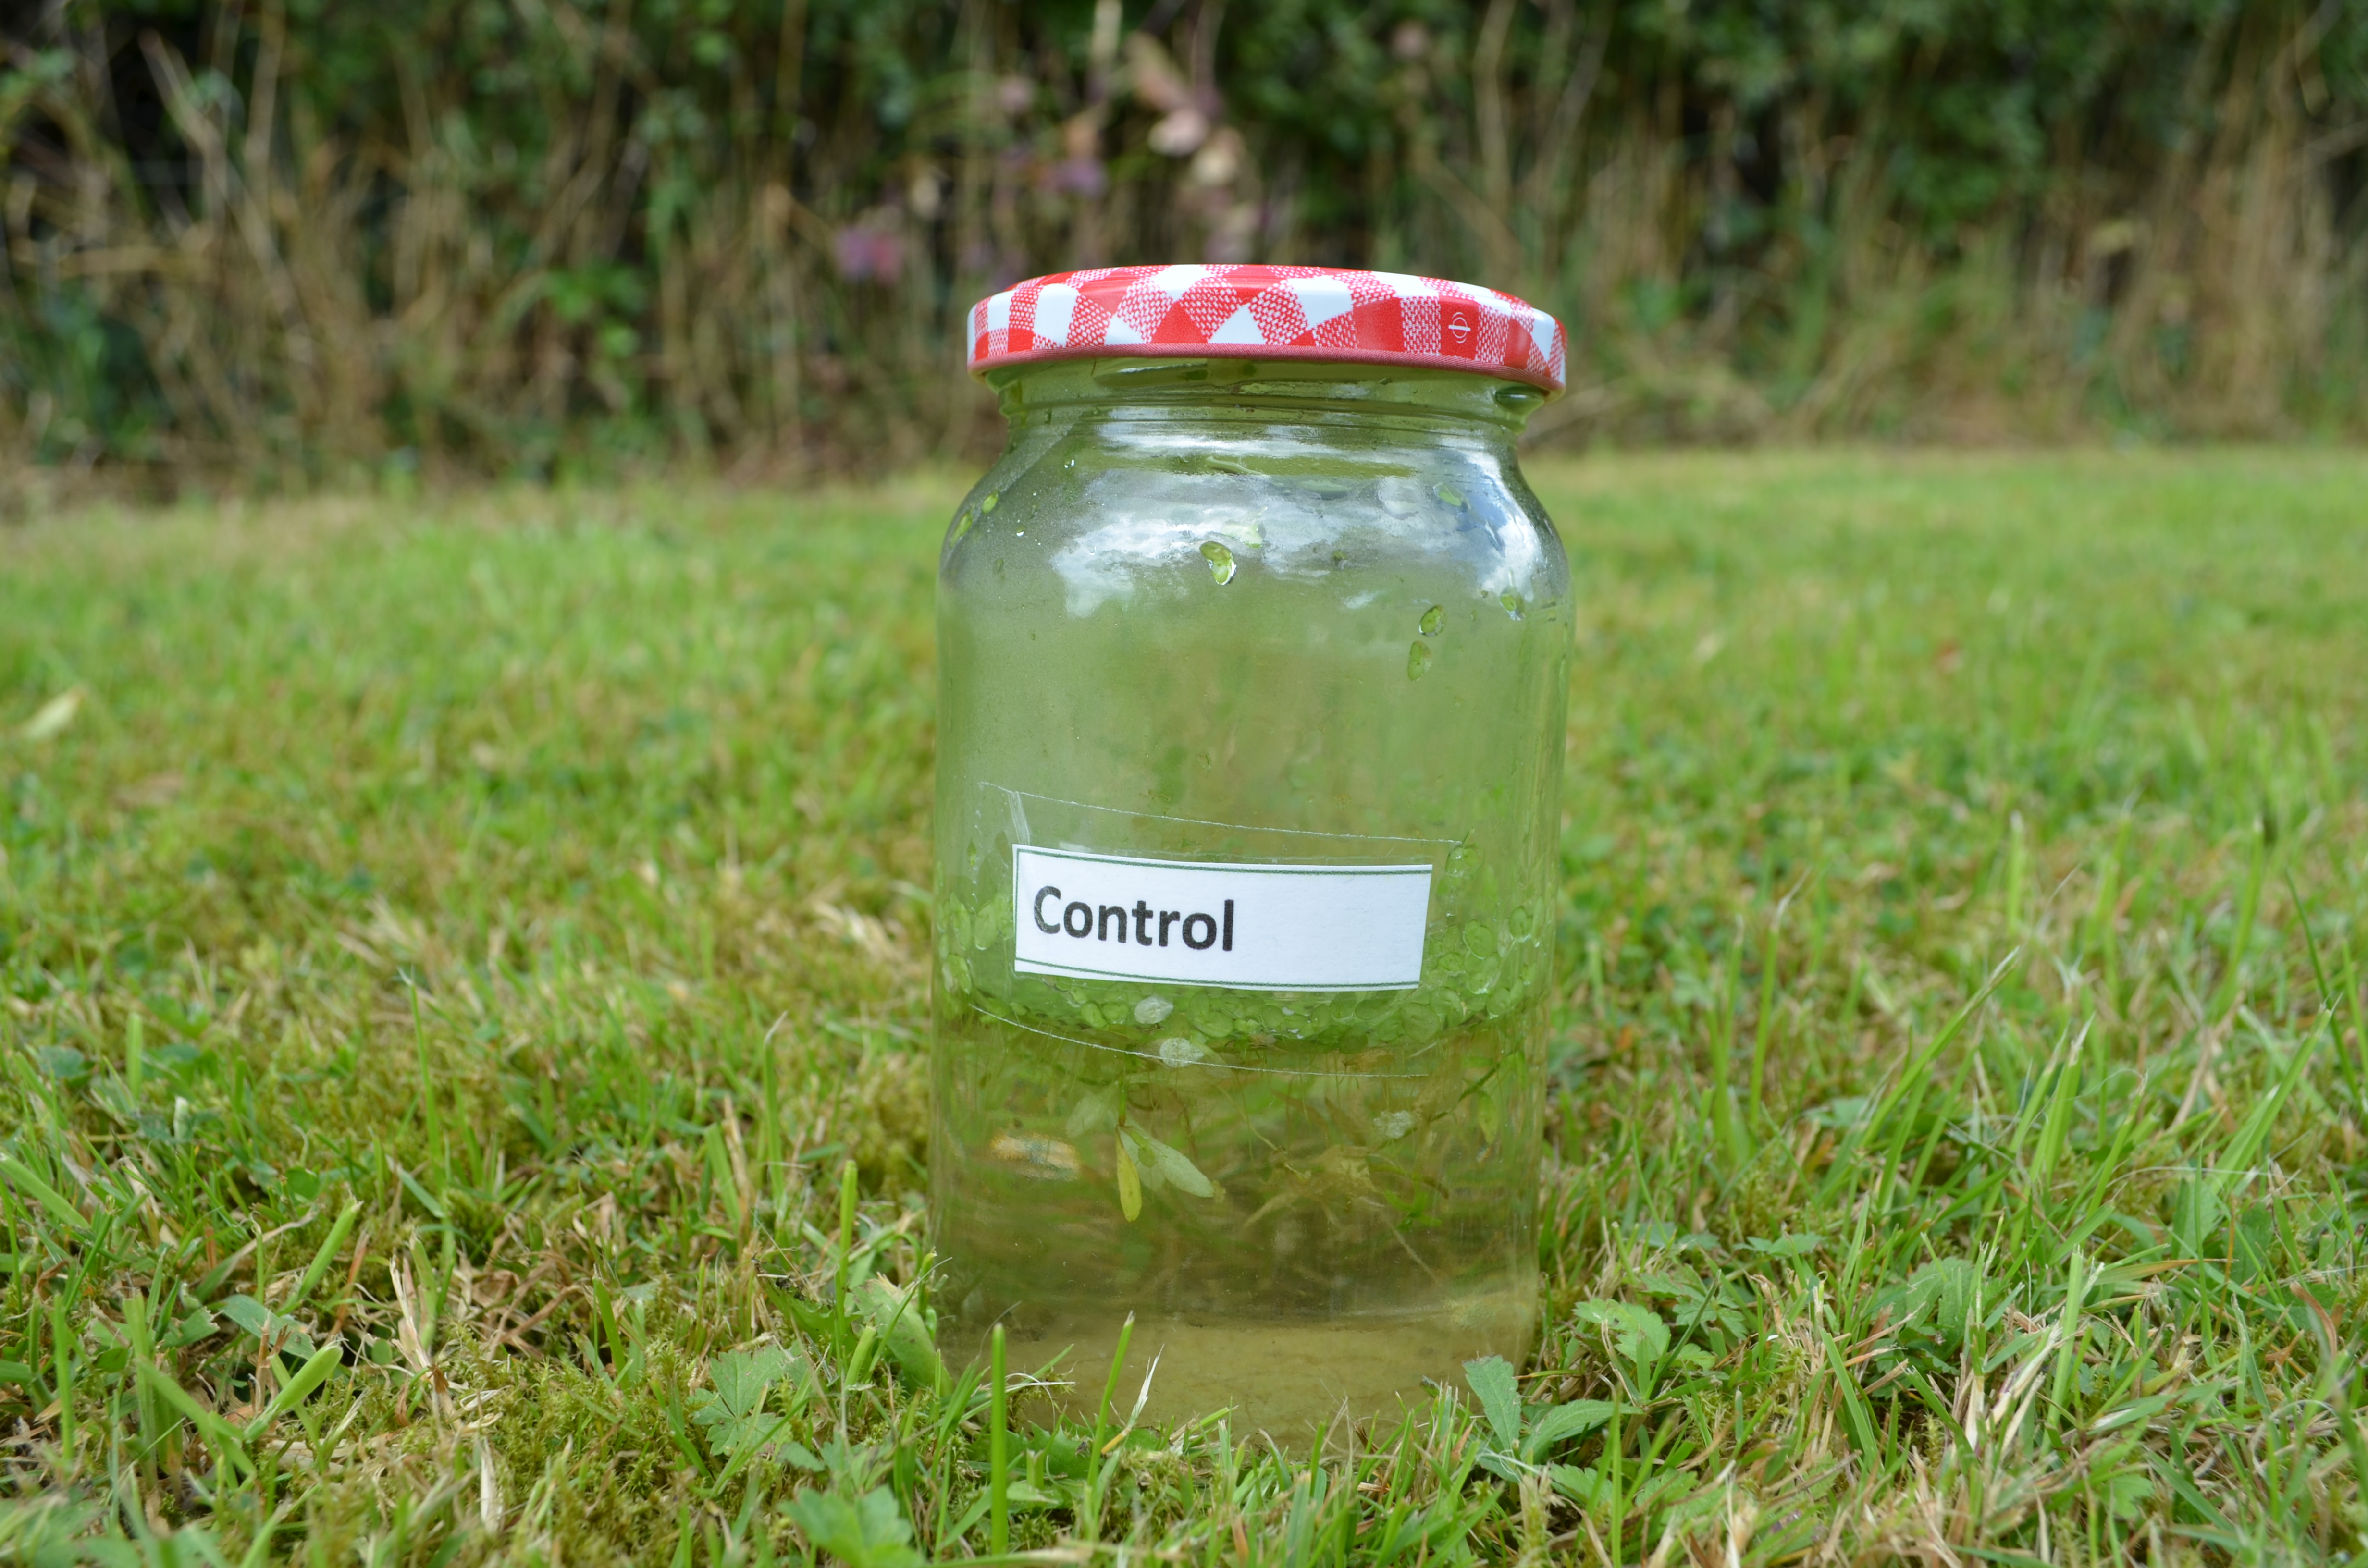 An empty jar with a control label on it